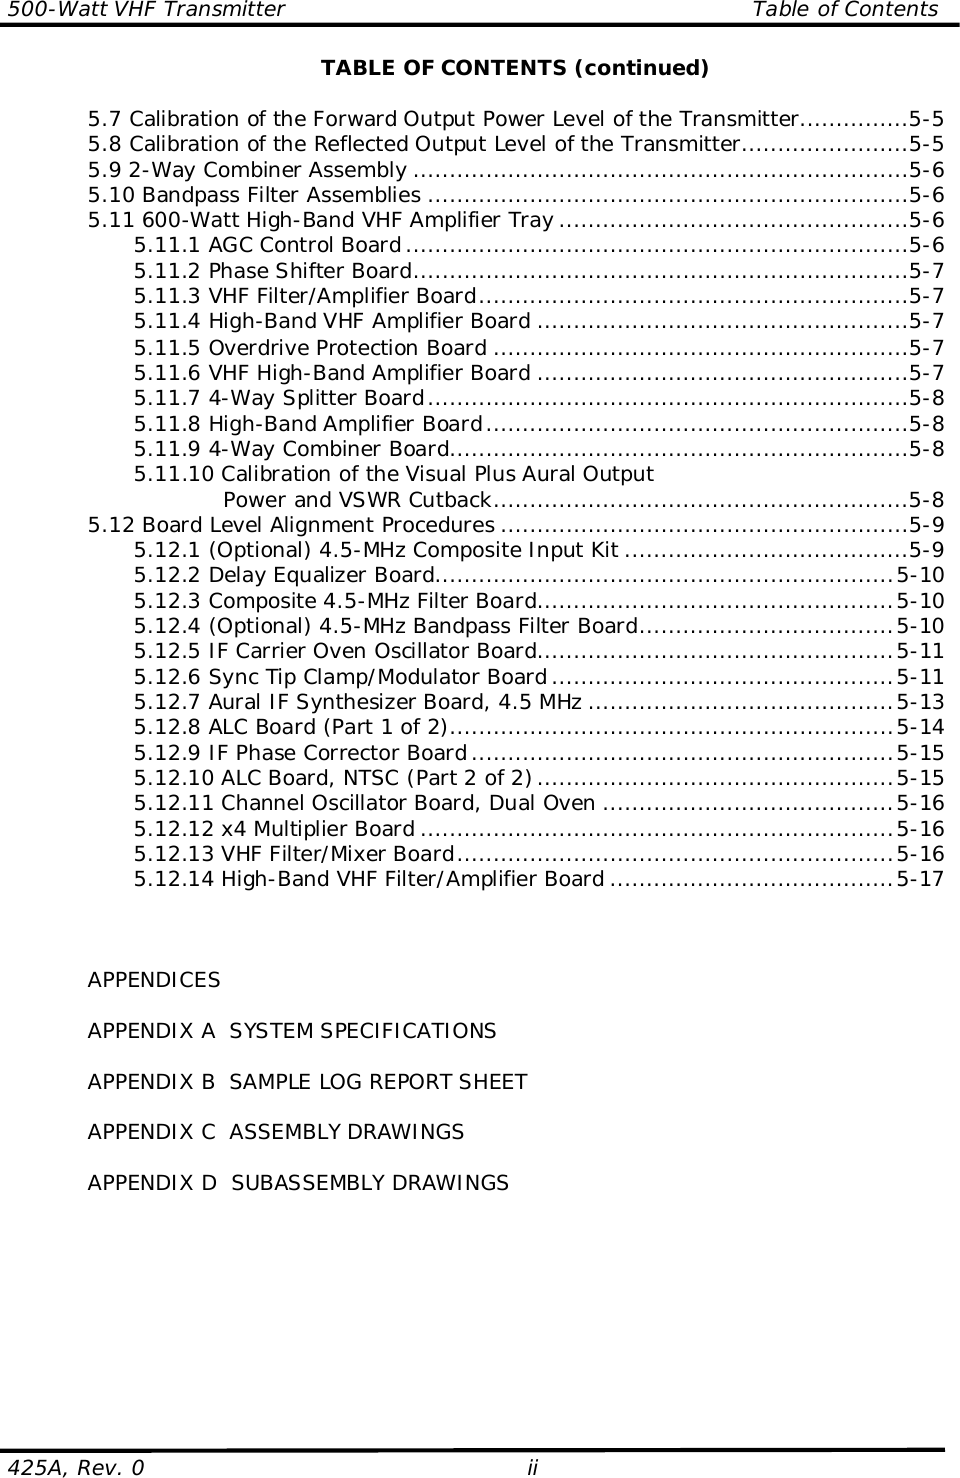 500-Watt VHF Transmitter                                                                Table of Contents425A, Rev. 0 iiTABLE OF CONTENTS (continued)5.7 Calibration of the Forward Output Power Level of the Transmitter...............5-55.8 Calibration of the Reflected Output Level of the Transmitter.......................5-55.9 2-Way Combiner Assembly ....................................................................5-65.10 Bandpass Filter Assemblies ..................................................................5-65.11 600-Watt High-Band VHF Amplifier Tray ................................................5-65.11.1 AGC Control Board.....................................................................5-65.11.2 Phase Shifter Board....................................................................5-75.11.3 VHF Filter/Amplifier Board...........................................................5-75.11.4 High-Band VHF Amplifier Board ...................................................5-75.11.5 Overdrive Protection Board .........................................................5-75.11.6 VHF High-Band Amplifier Board ...................................................5-75.11.7 4-Way Splitter Board..................................................................5-85.11.8 High-Band Amplifier Board..........................................................5-85.11.9 4-Way Combiner Board...............................................................5-85.11.10 Calibration of the Visual Plus Aural OutputPower and VSWR Cutback.........................................................5-85.12 Board Level Alignment Procedures ........................................................5-95.12.1 (Optional) 4.5-MHz Composite Input Kit .......................................5-95.12.2 Delay Equalizer Board...............................................................5-105.12.3 Composite 4.5-MHz Filter Board.................................................5-105.12.4 (Optional) 4.5-MHz Bandpass Filter Board...................................5-105.12.5 IF Carrier Oven Oscillator Board.................................................5-115.12.6 Sync Tip Clamp/Modulator Board ...............................................5-115.12.7 Aural IF Synthesizer Board, 4.5 MHz ..........................................5-135.12.8 ALC Board (Part 1 of 2).............................................................5-145.12.9 IF Phase Corrector Board..........................................................5-155.12.10 ALC Board, NTSC (Part 2 of 2).................................................5-155.12.11 Channel Oscillator Board, Dual Oven ........................................5-165.12.12 x4 Multiplier Board .................................................................5-165.12.13 VHF Filter/Mixer Board............................................................5-165.12.14 High-Band VHF Filter/Amplifier Board .......................................5-17APPENDICESAPPENDIX A  SYSTEM SPECIFICATIONSAPPENDIX B  SAMPLE LOG REPORT SHEETAPPENDIX C  ASSEMBLY DRAWINGSAPPENDIX D  SUBASSEMBLY DRAWINGS